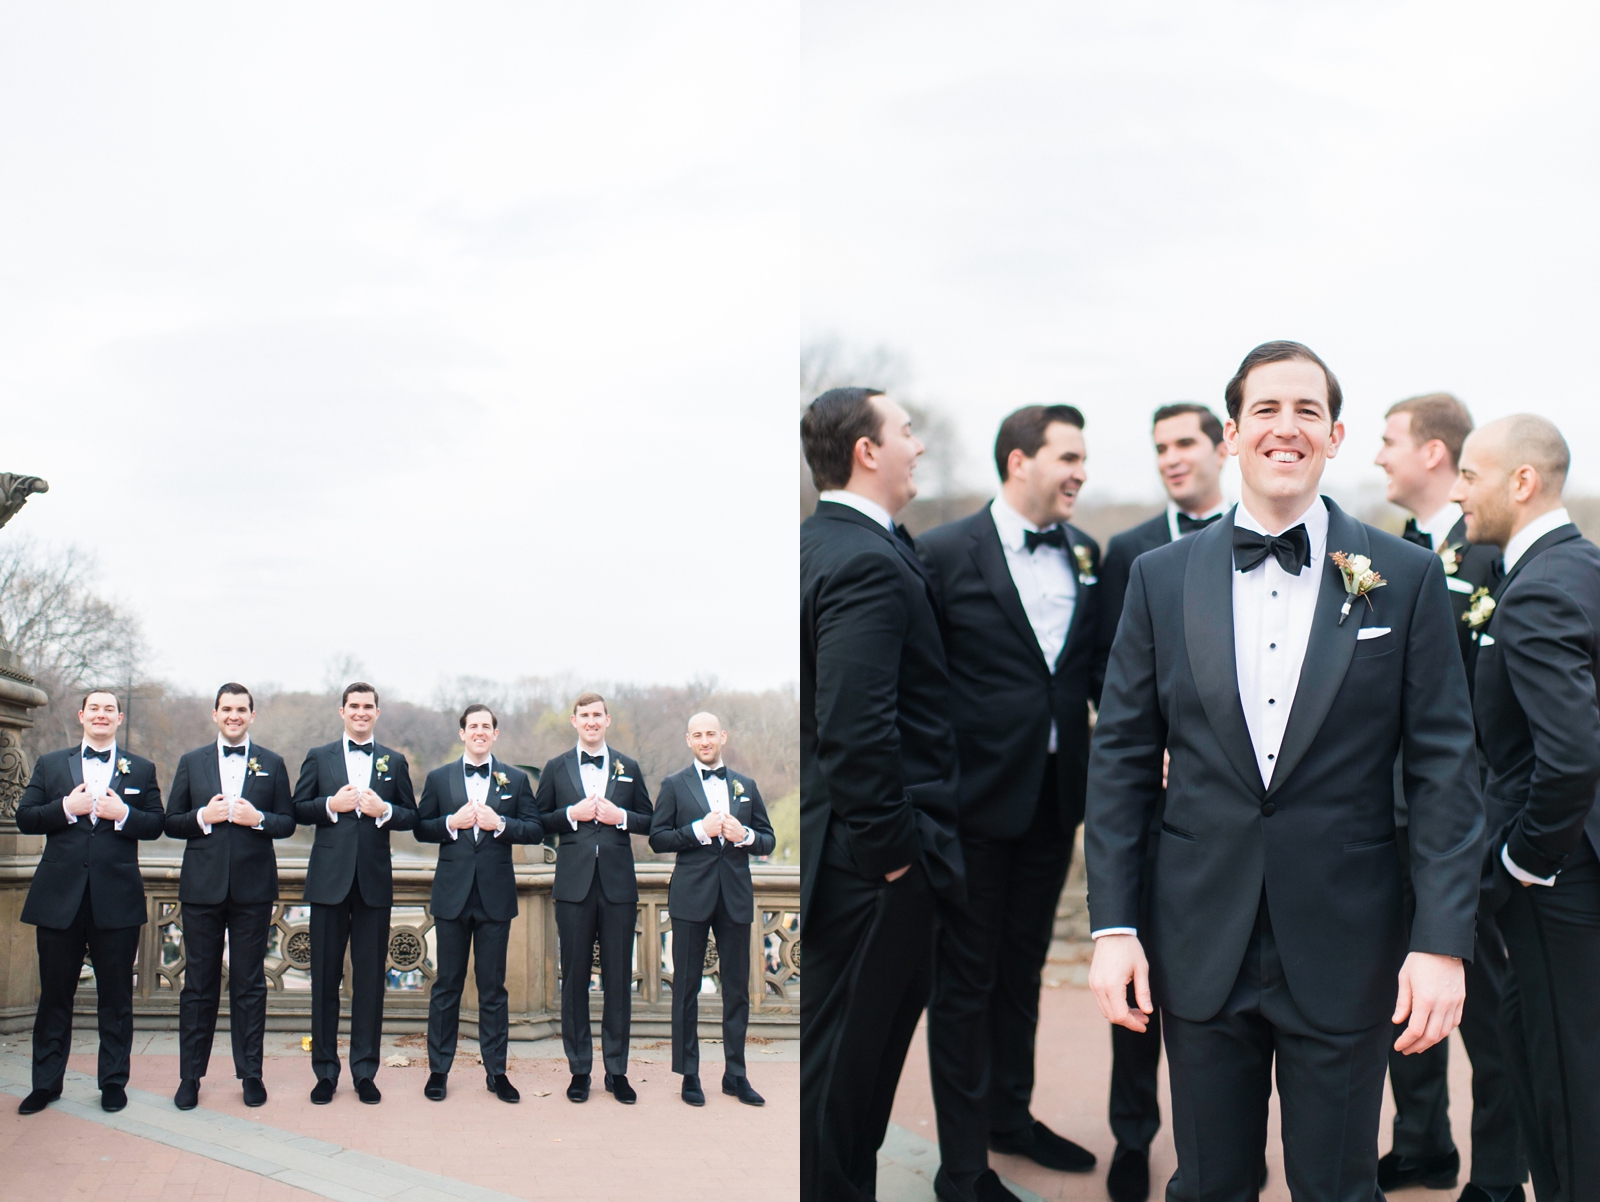 Central Park wedding photo with groom and groomsmen